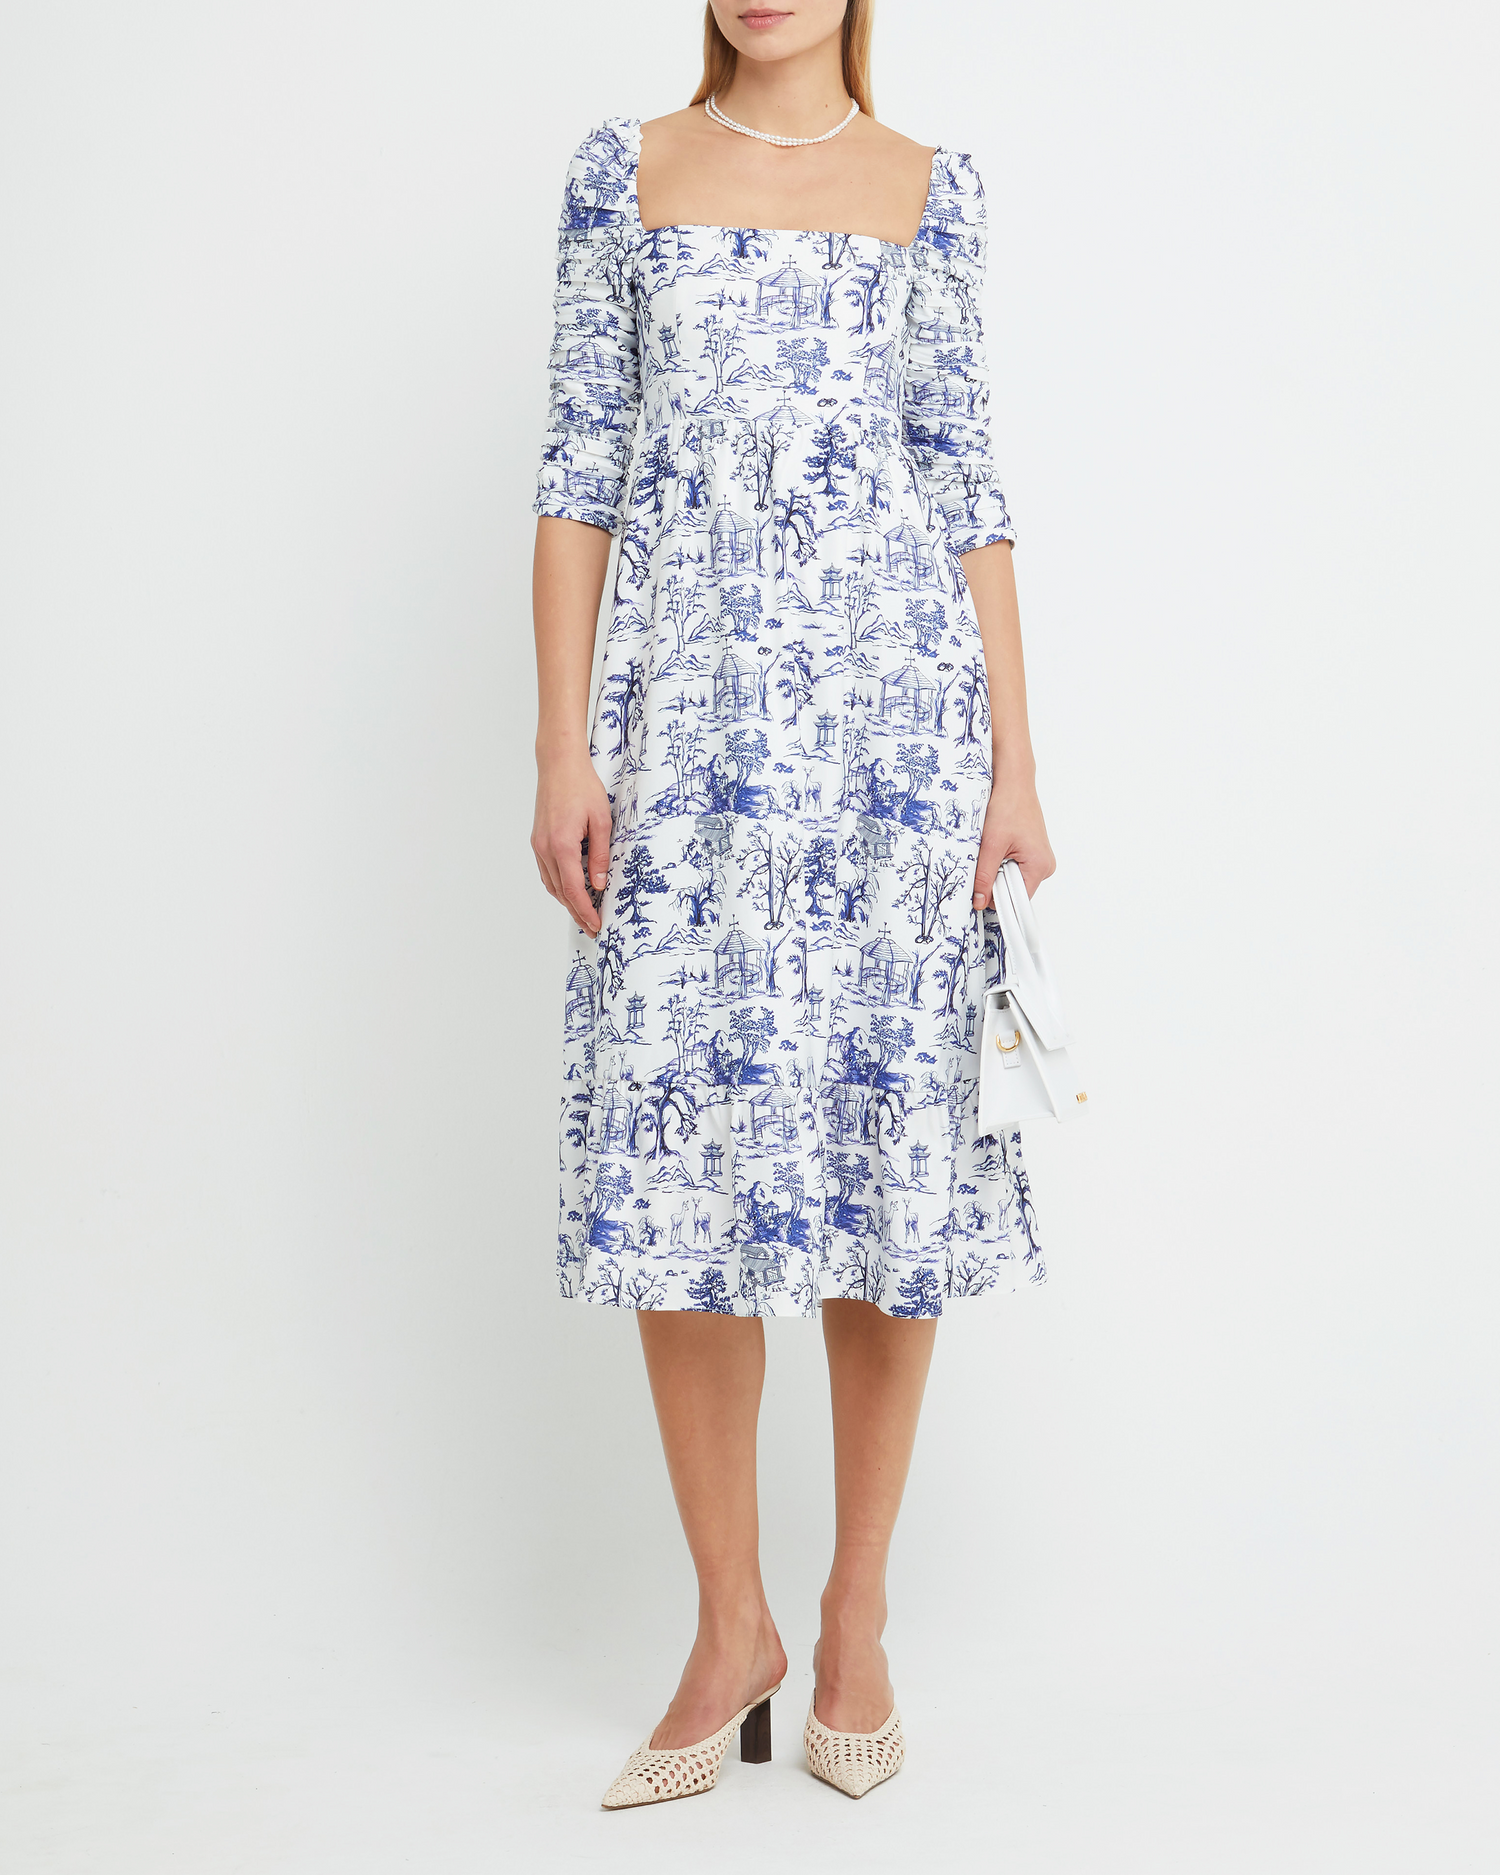 Fourth image of Bonnie Dress, a blue midi dress, toile, pockets, ruched sleeves, square neckline, long sleeves, 3/4 sleeves